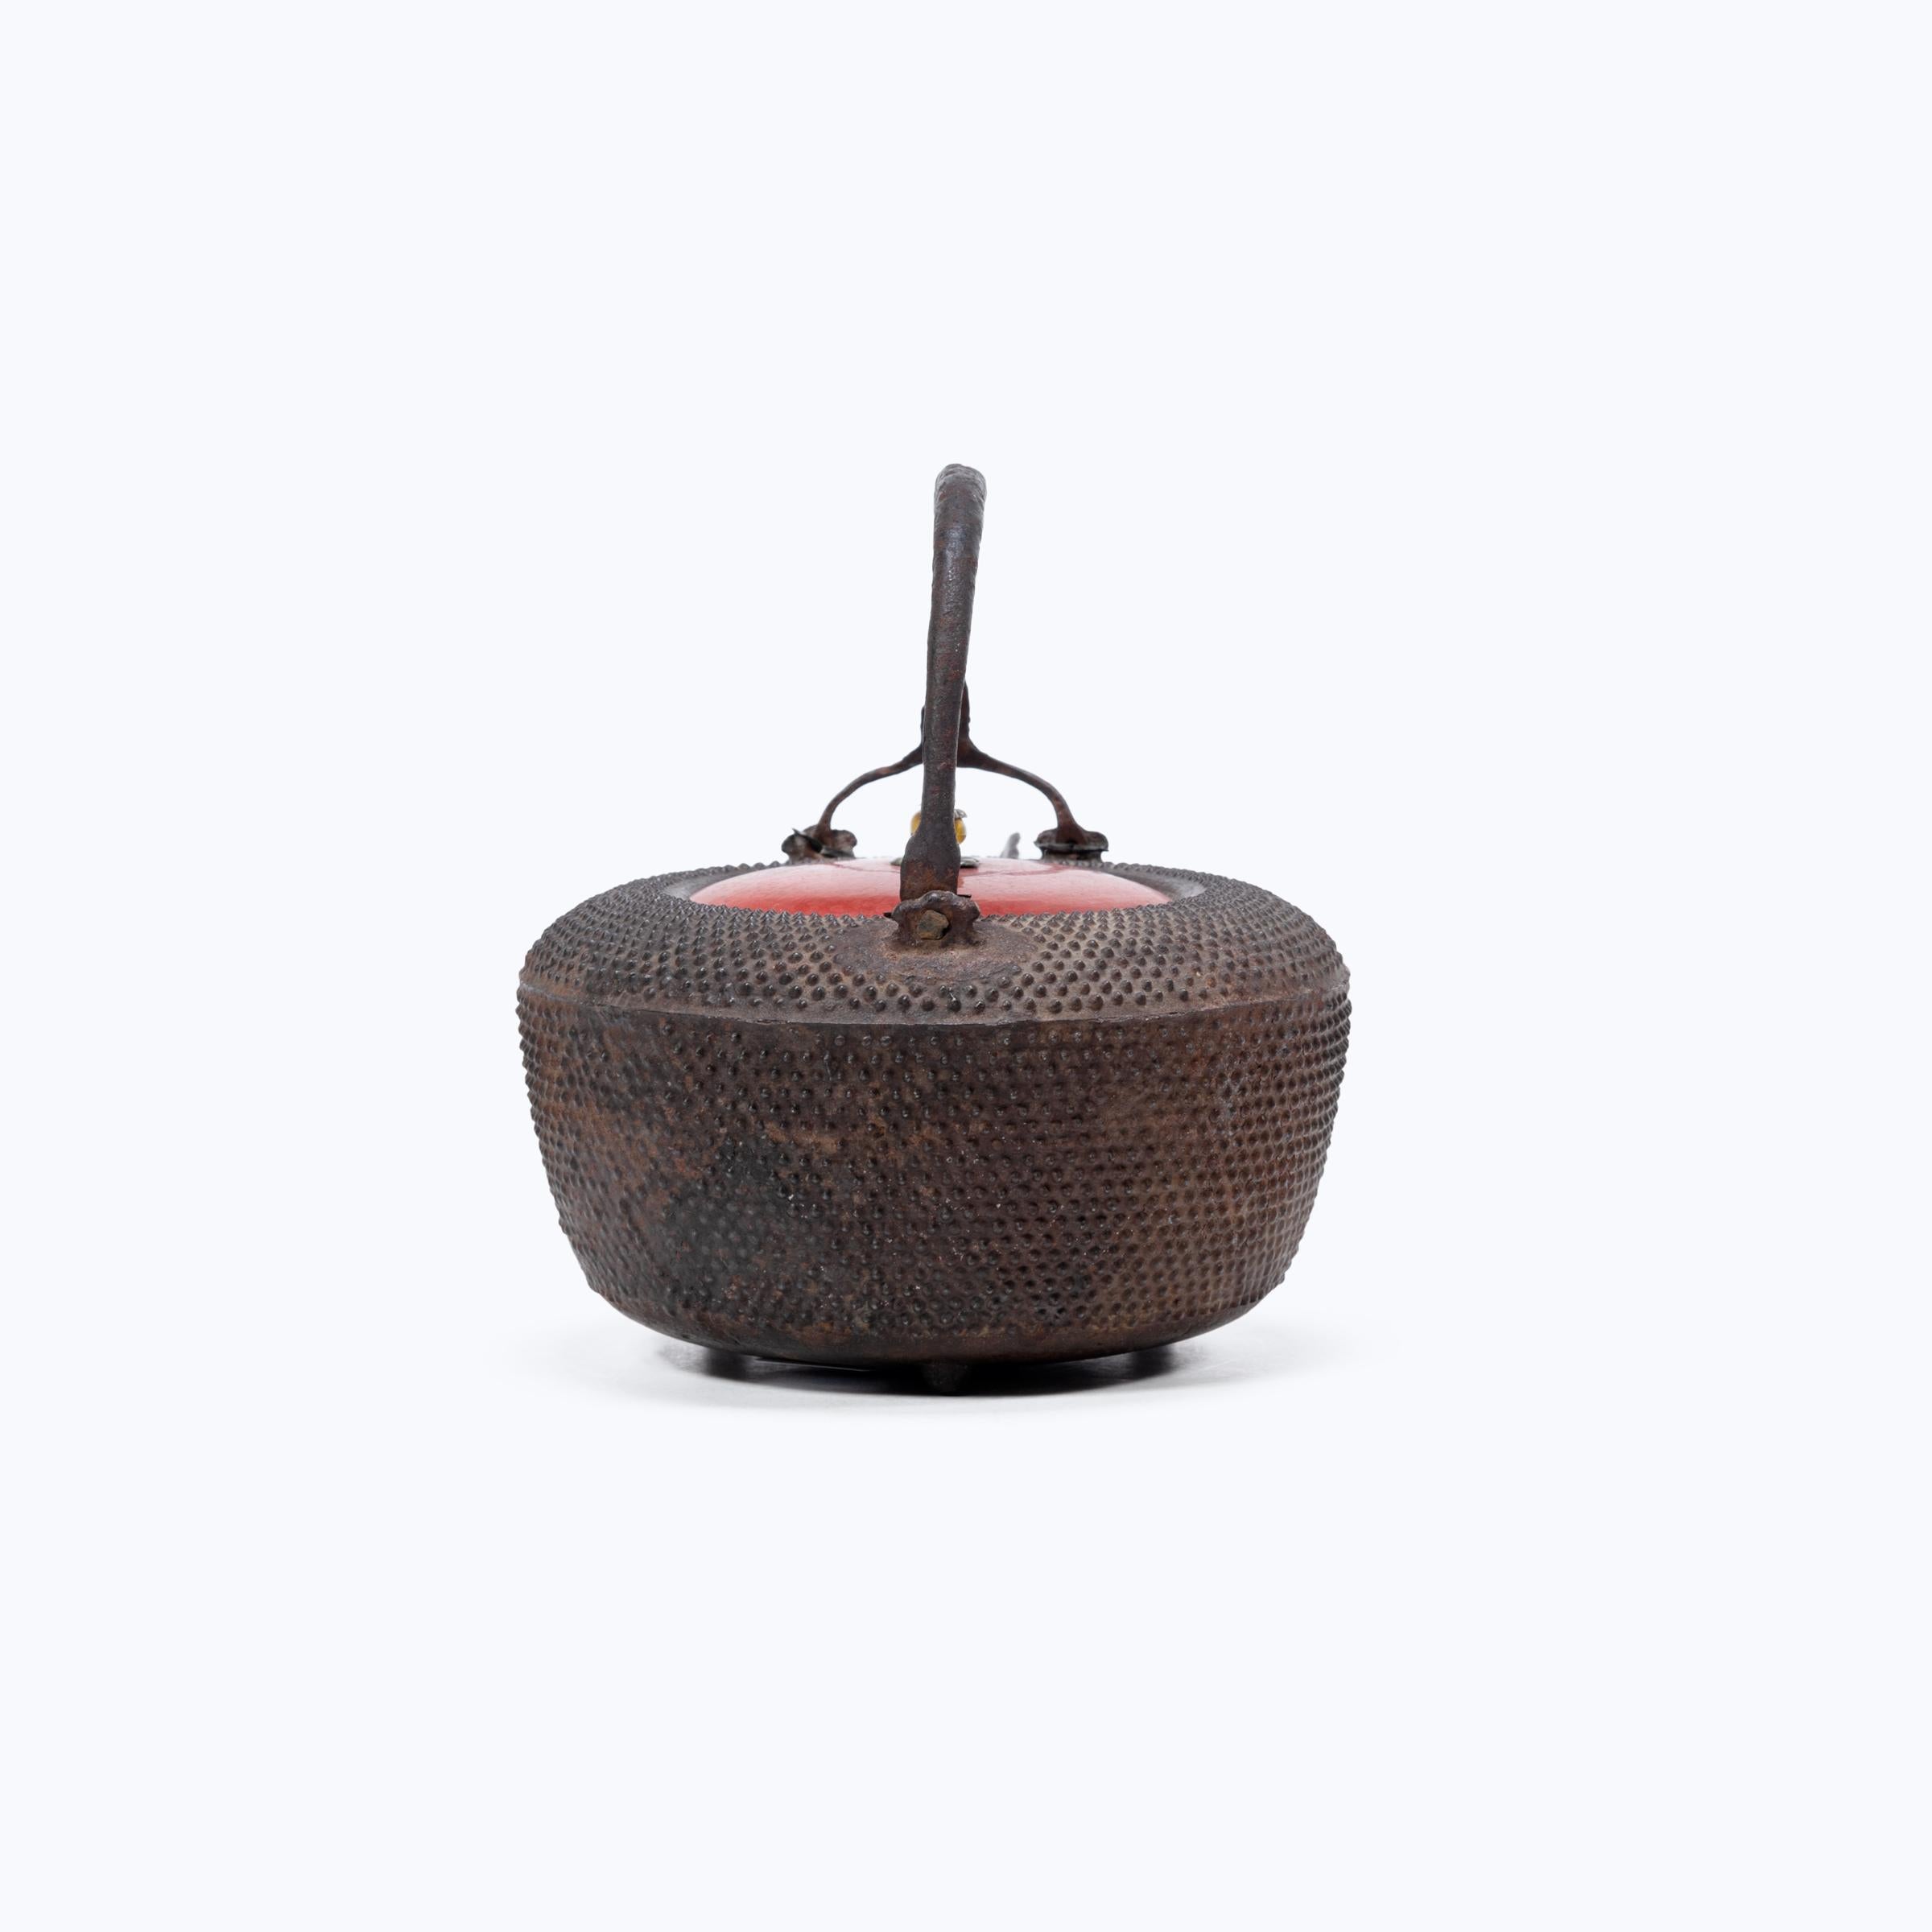 Cast Japanese Iron Tetsubin with Red Lacquer Lid, c. 1900